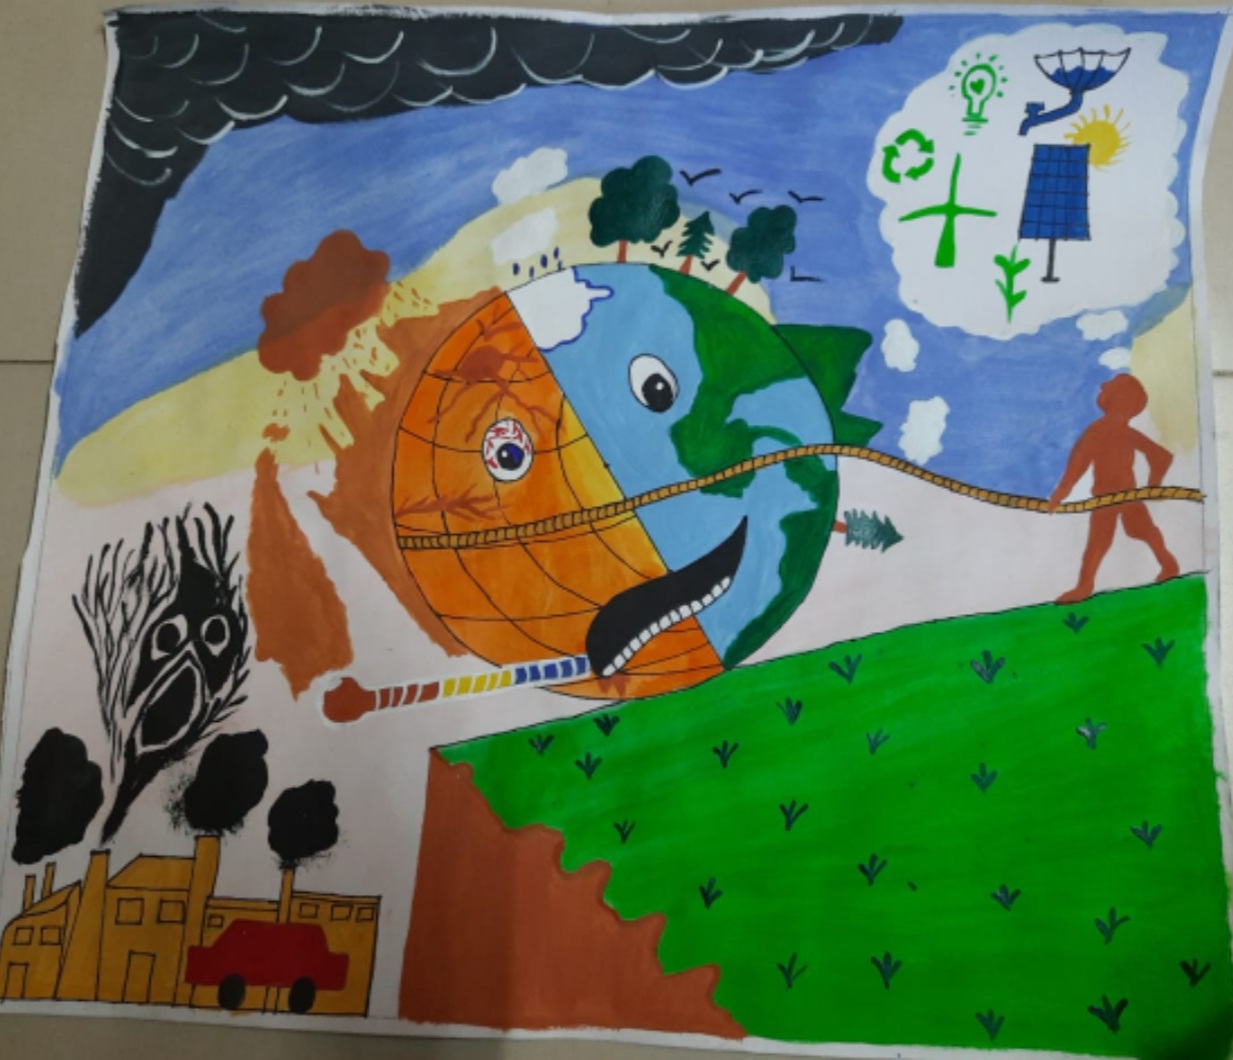 Poster making on save environment – India NCC